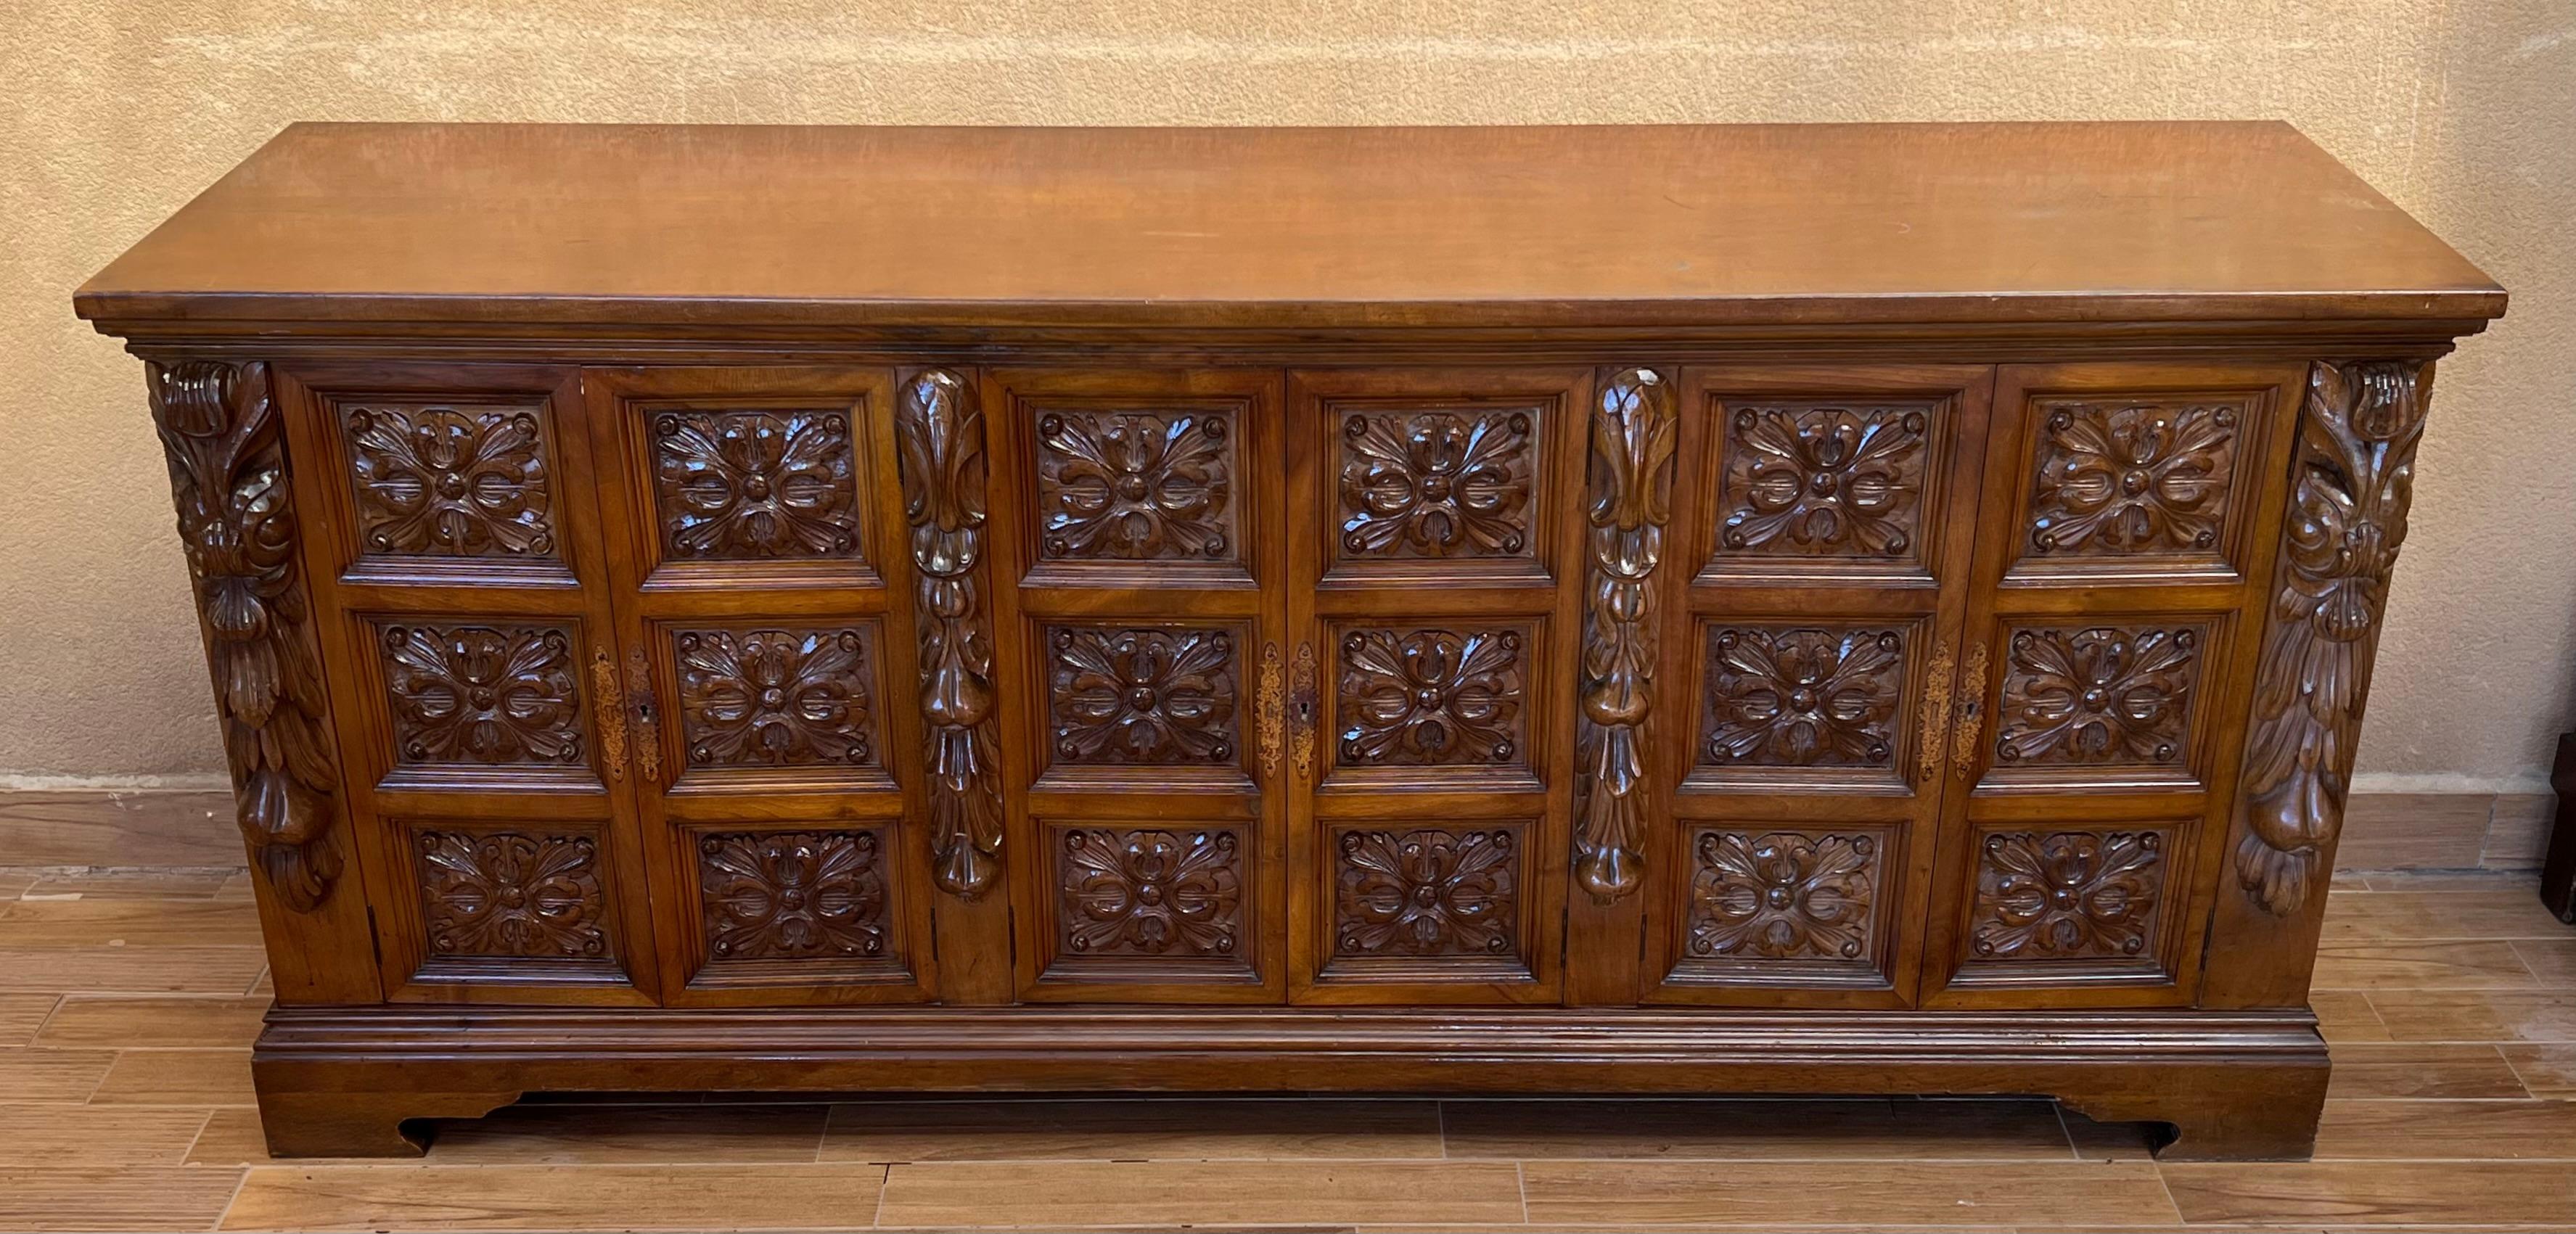 Antique Spanish Carved Walnut Sideboard with Florals Reliefs, circa 1870-1880 For Sale 2